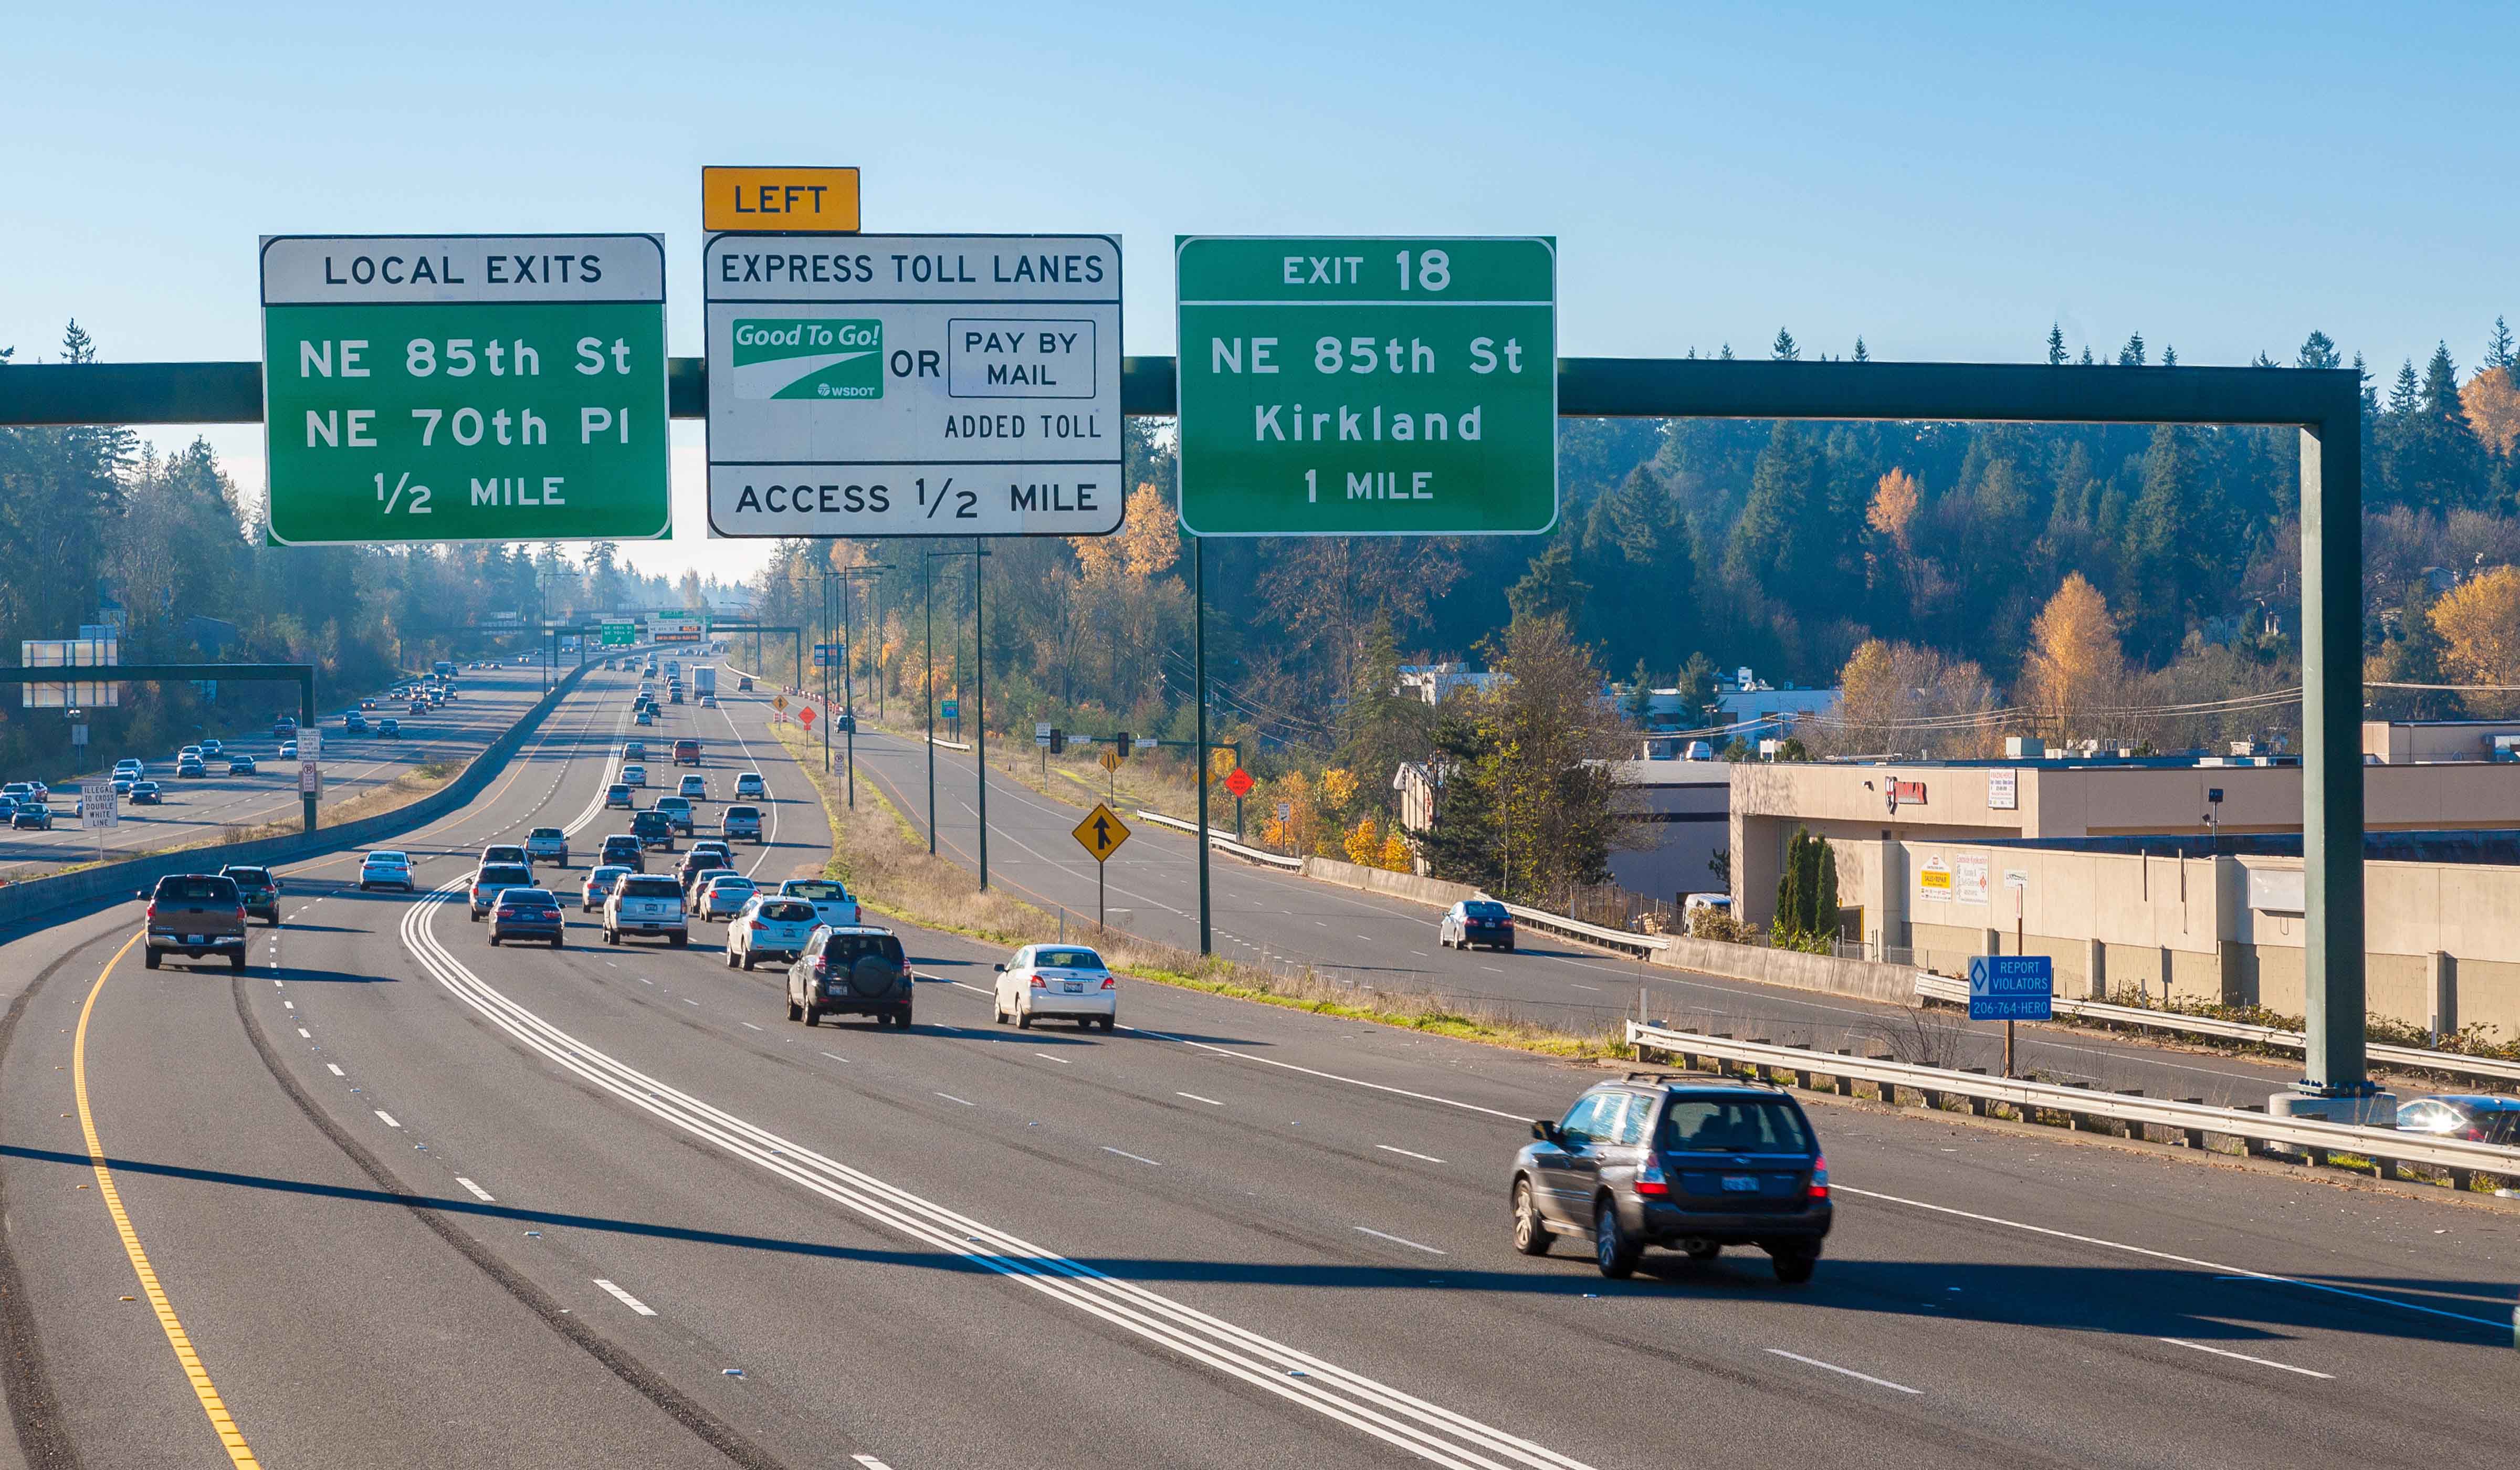 I405 Express Toll Lanes Analysis Usage, Benefits, and Equity